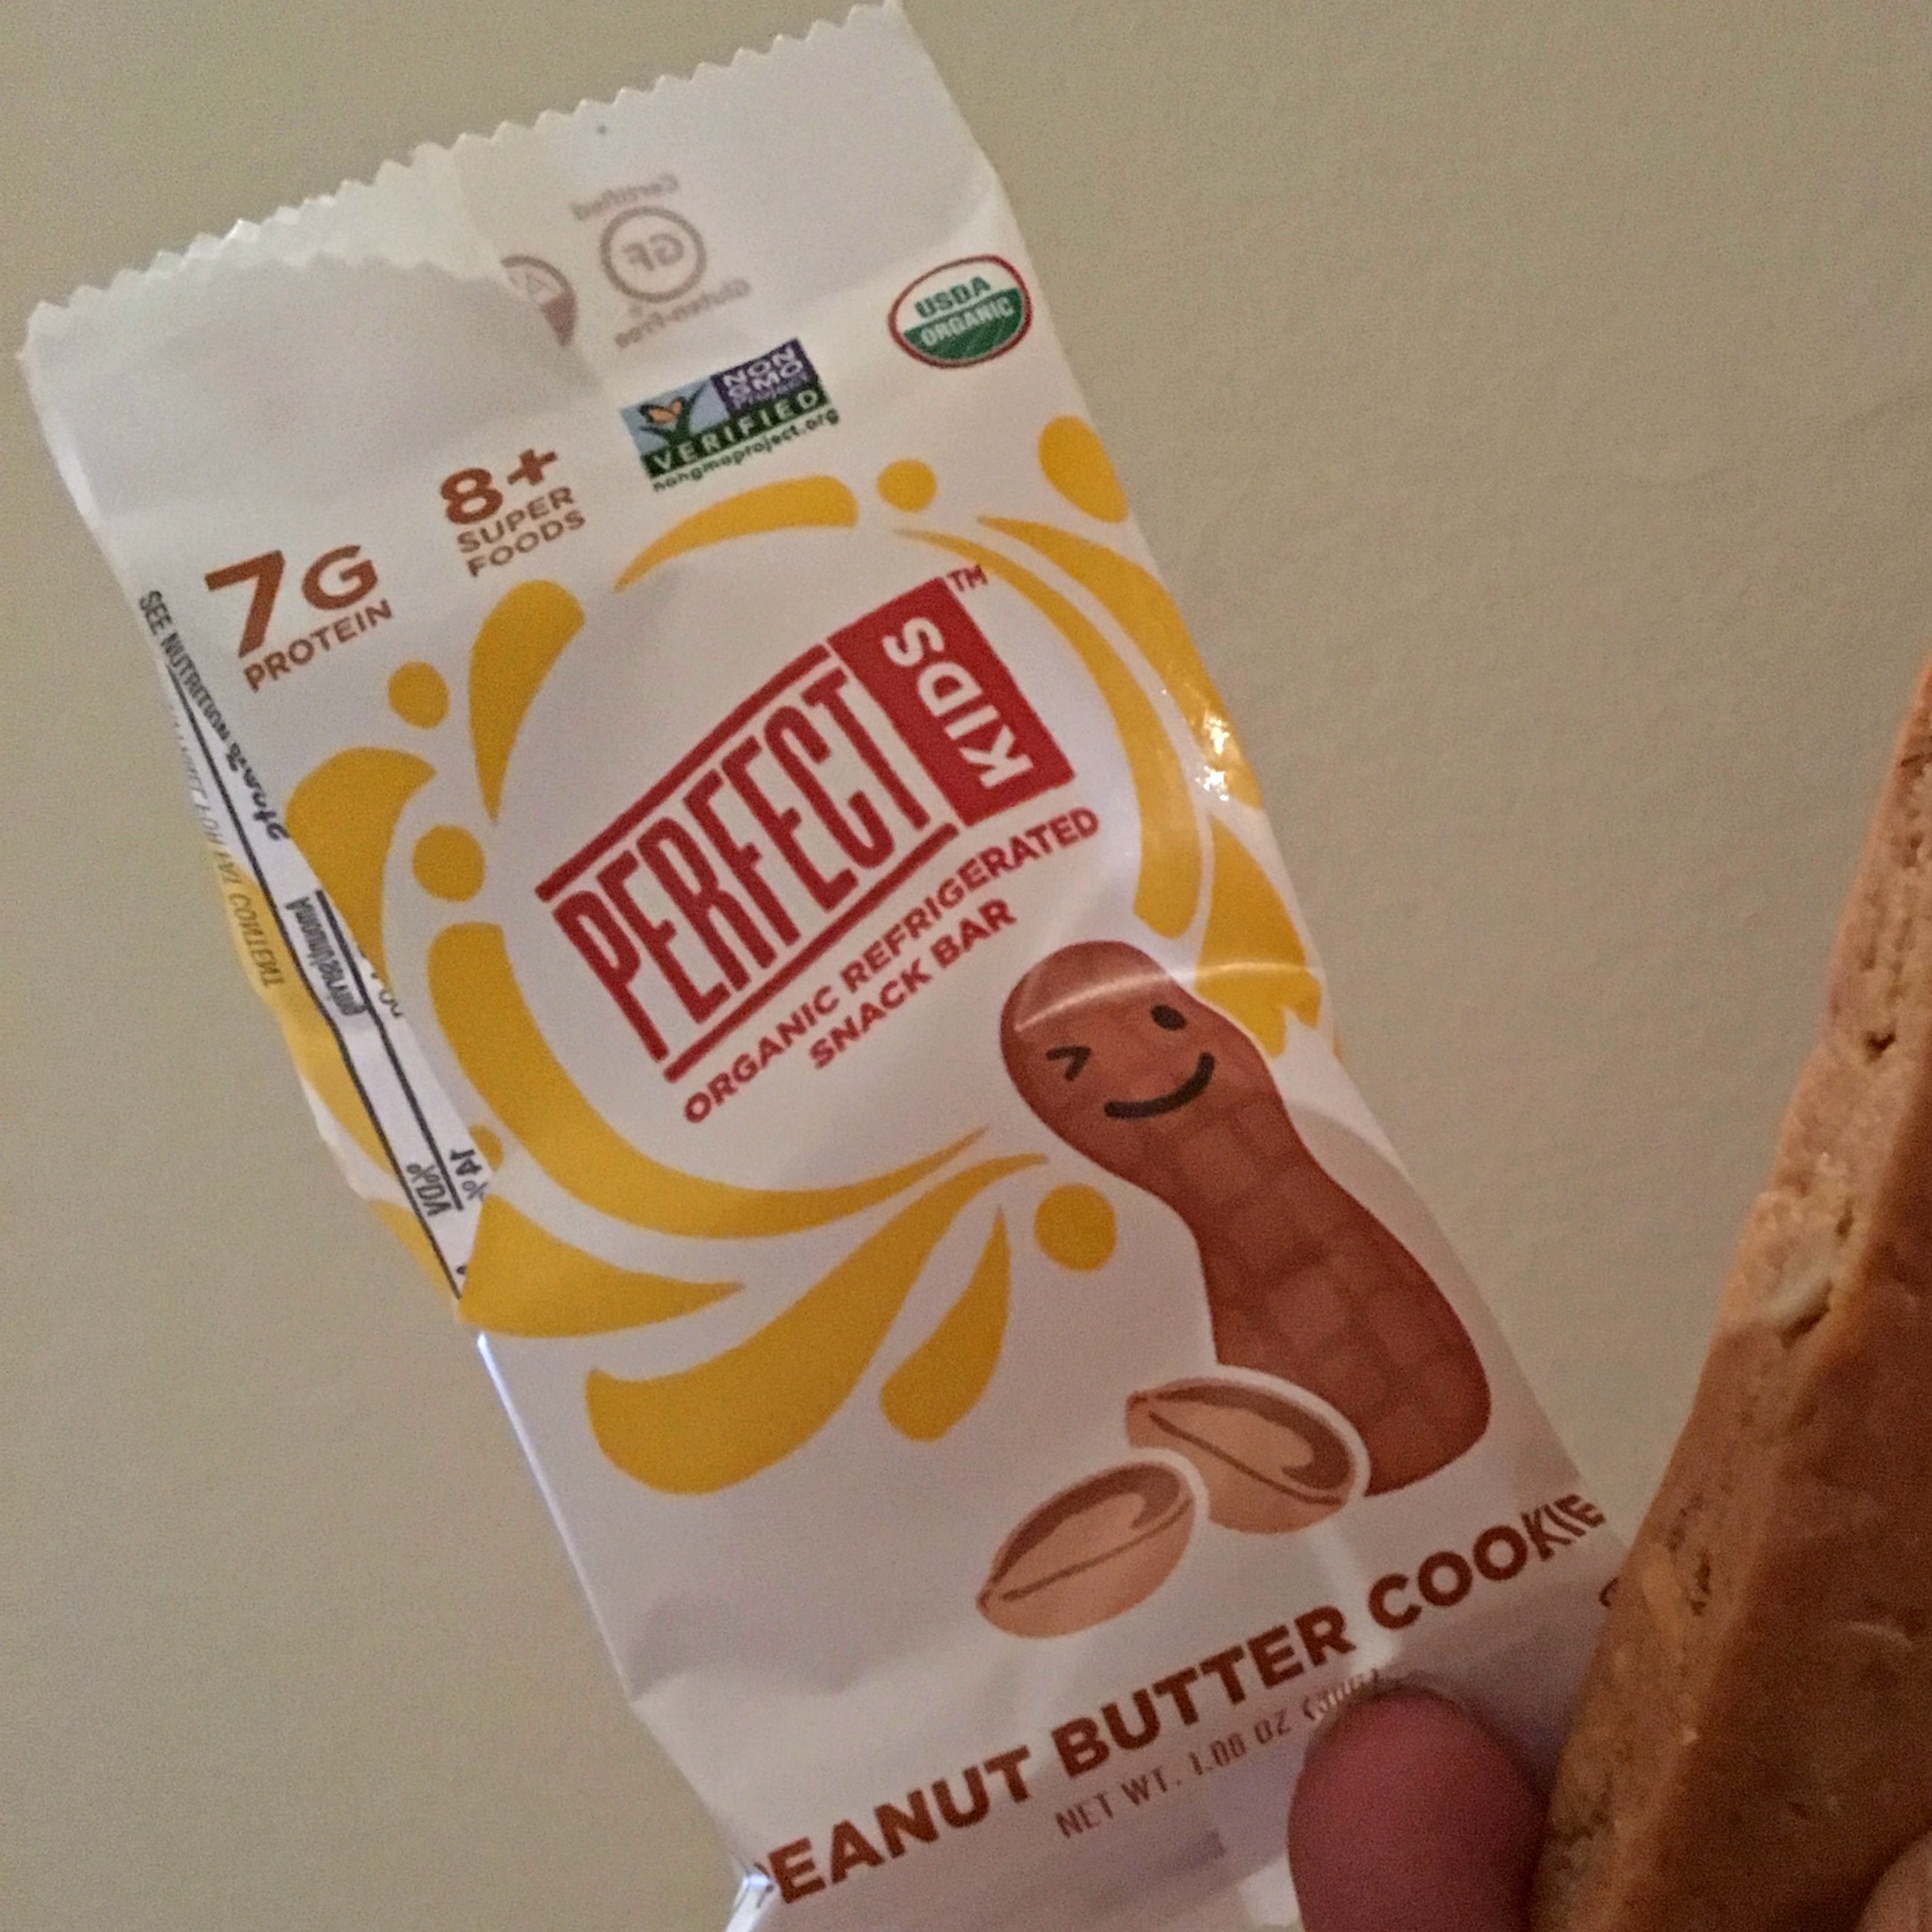 Tried it Tuesday: Perfect Kids Snack Bar #Giveaway